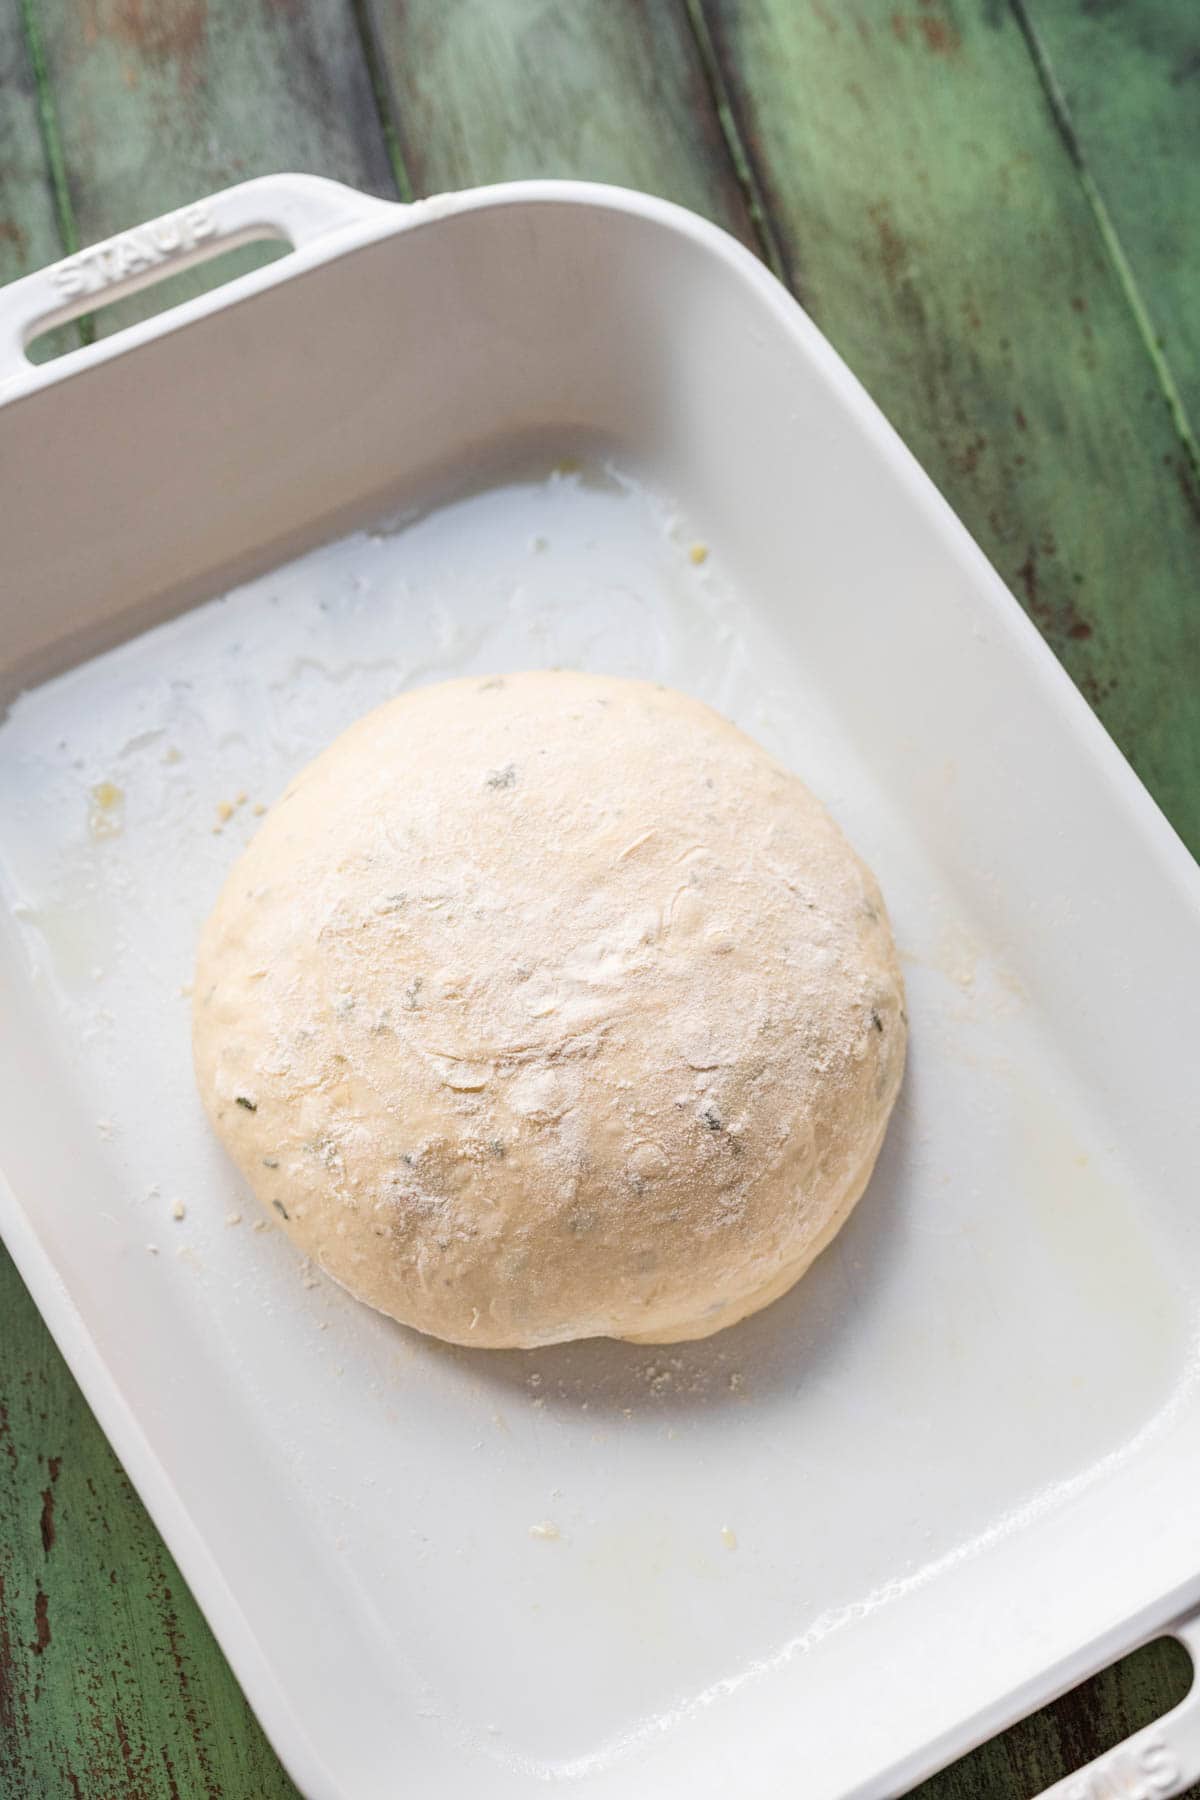 Crusty Garlic Herb Bread dough after proofing, shaped as round in baking dish